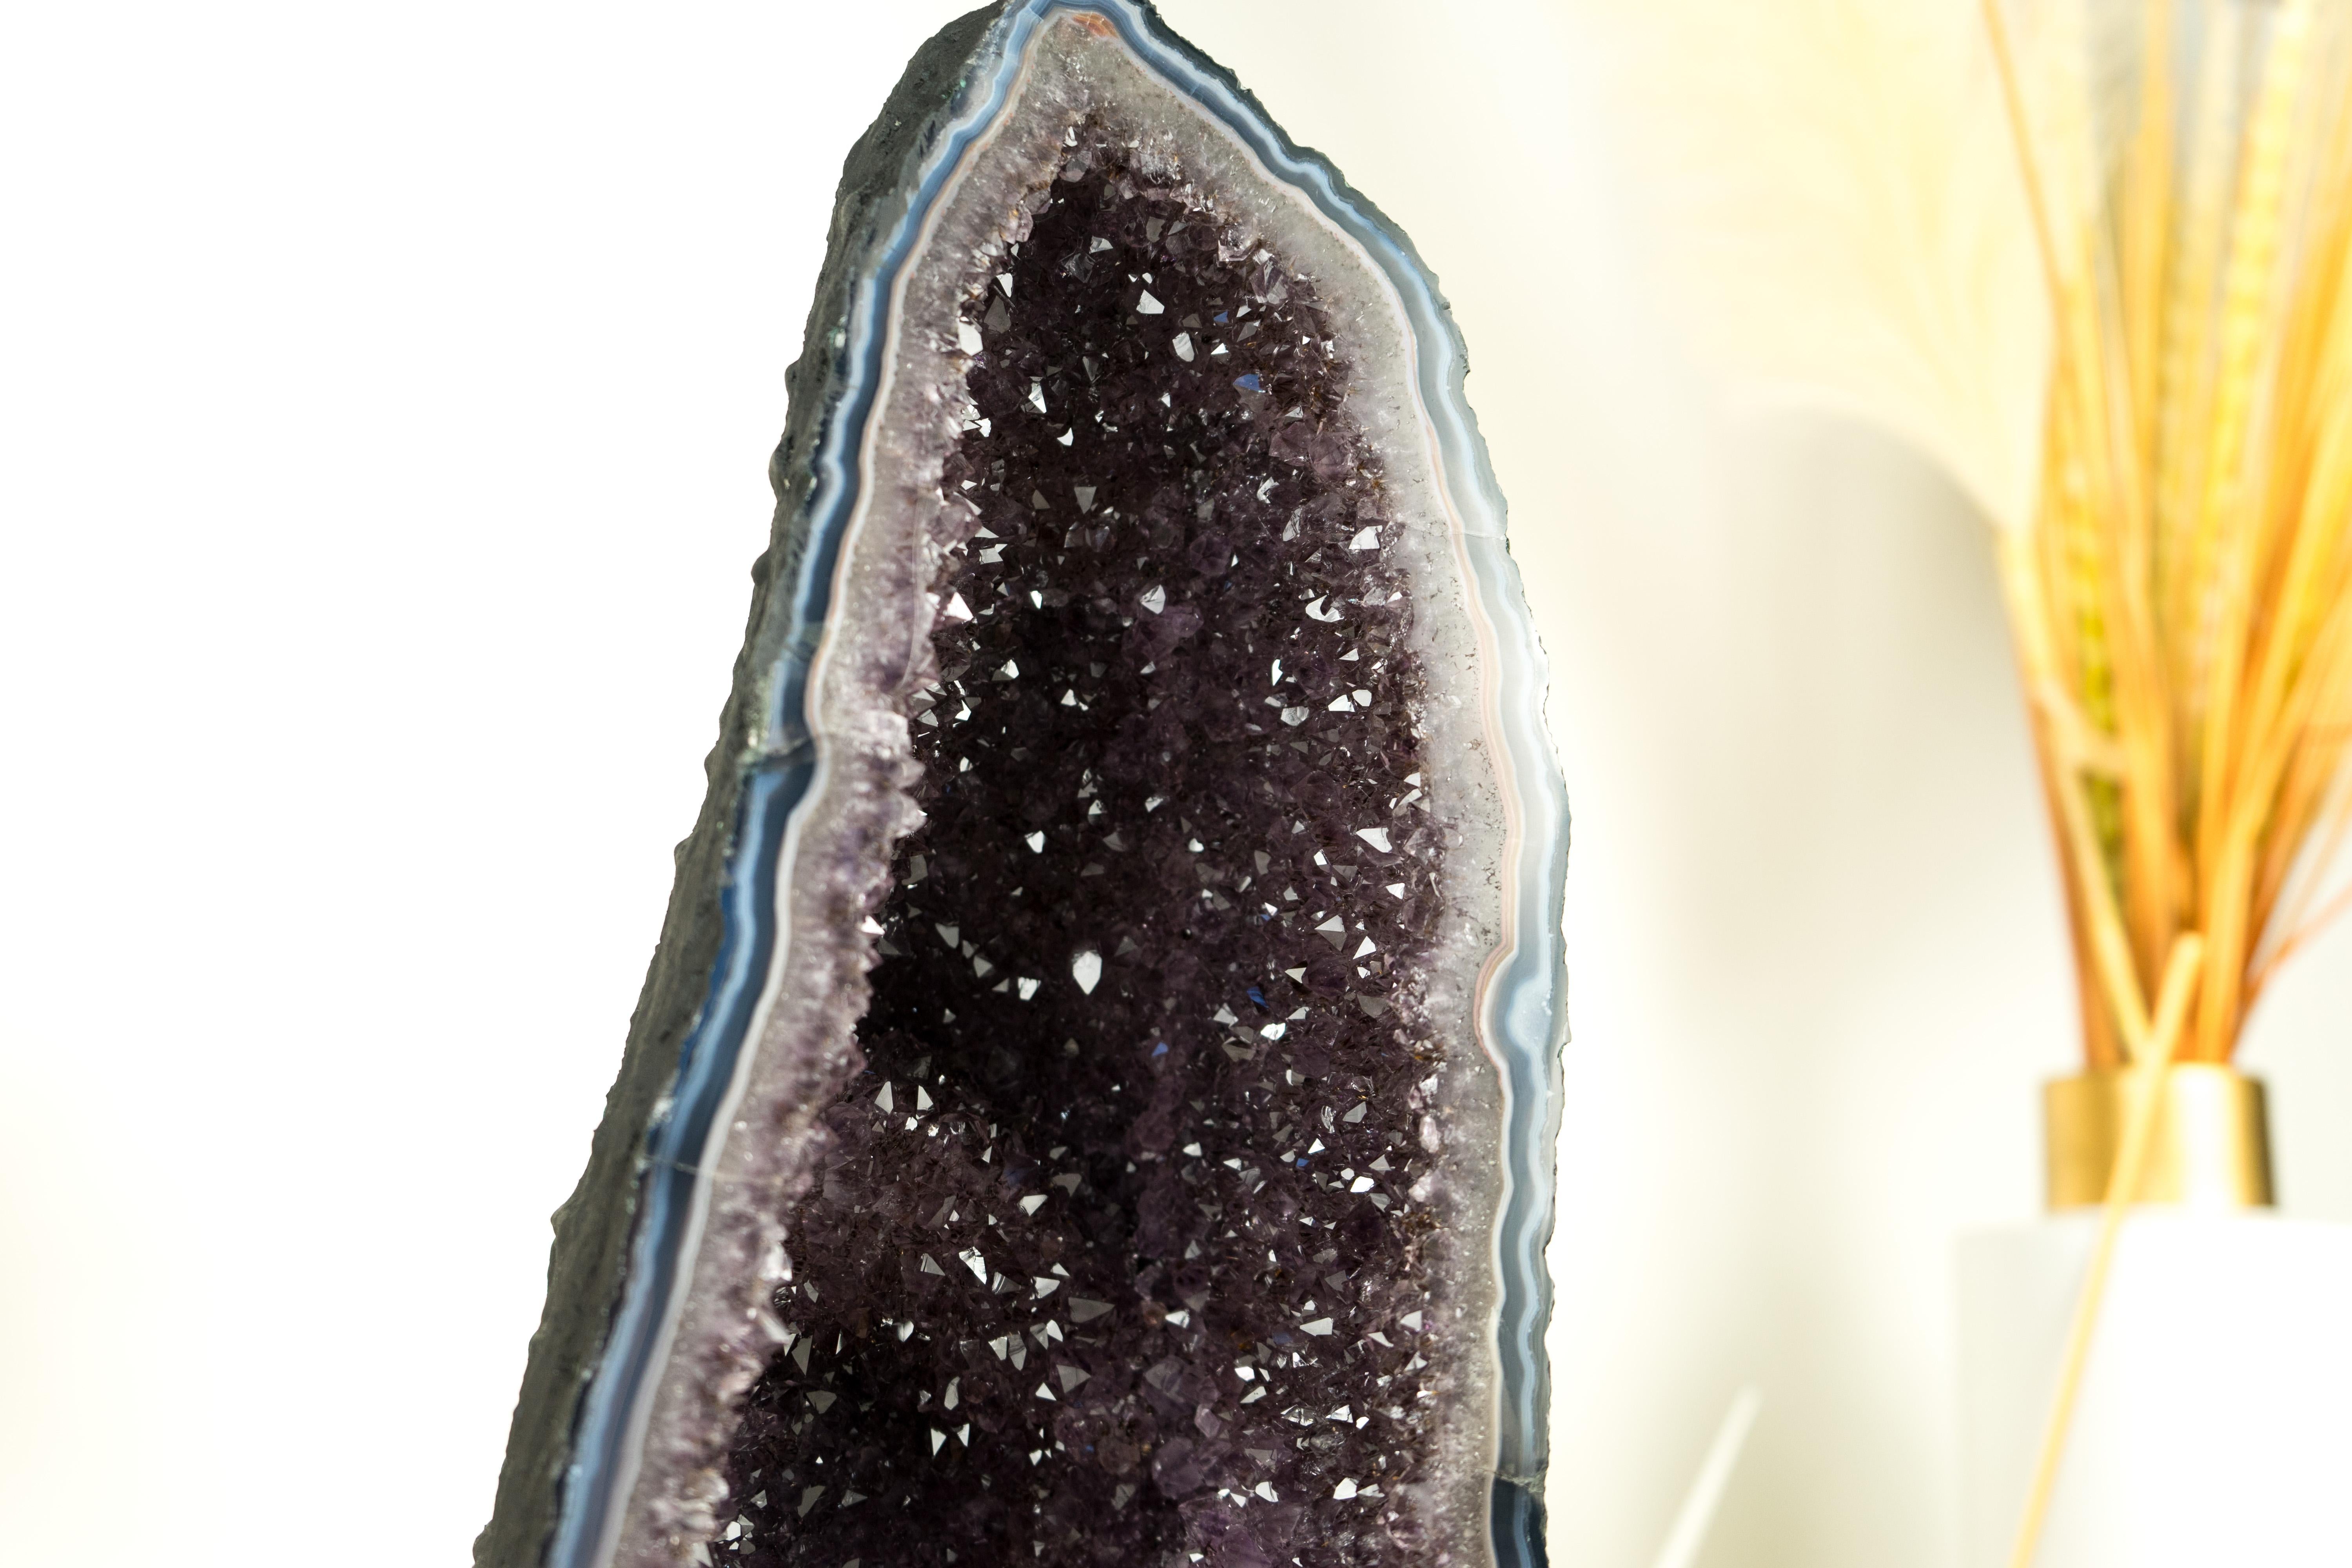 Brazilian Natural Blue Lace Agate Geode with Sparkly Lavender Amethyst For Sale